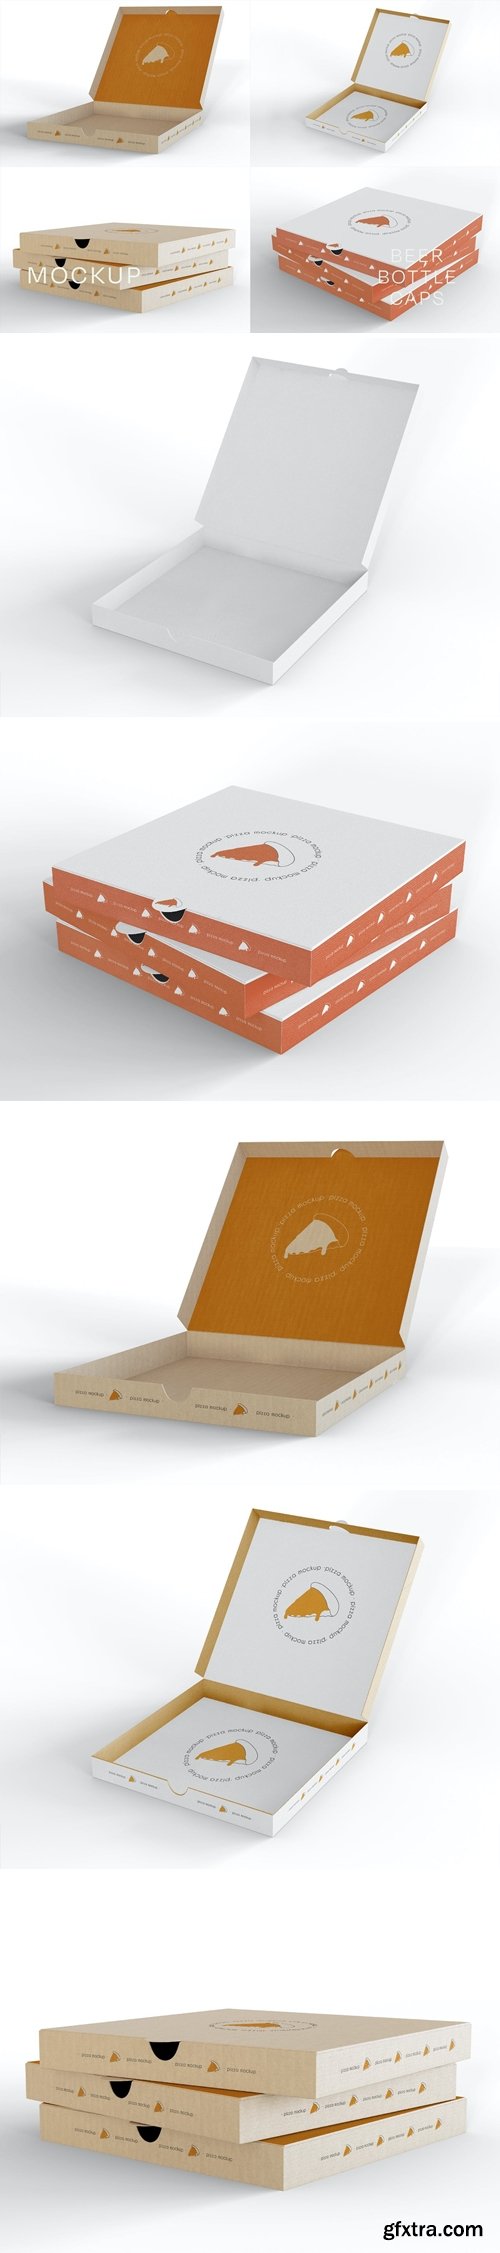 Stack of Pizza Boxes Mockup